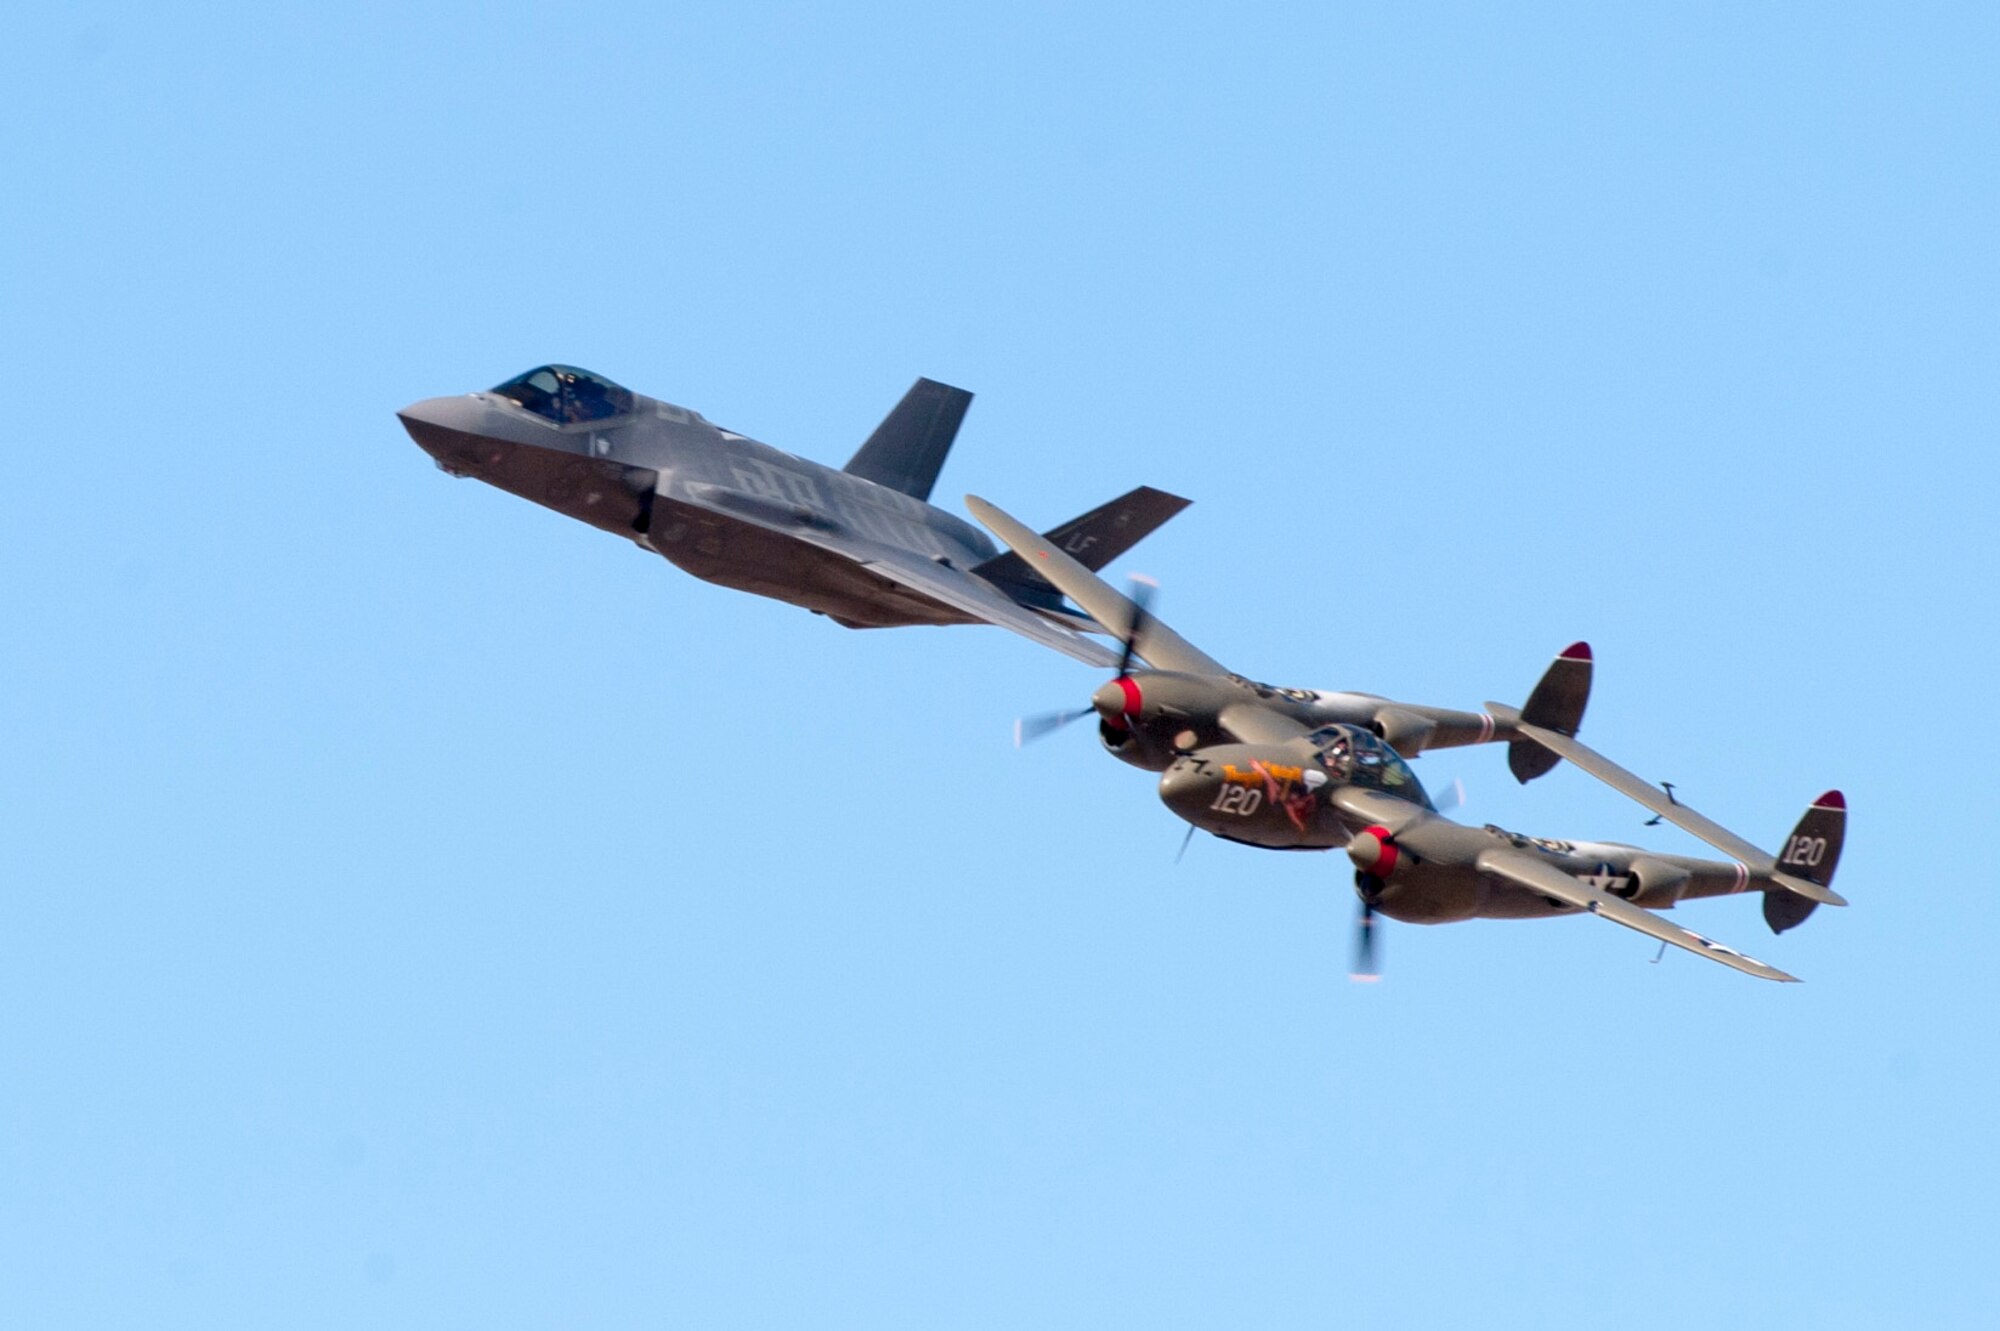 The F-35 Lightning II flies in formation with the P-38 Lightning during the Heritage Flight Conference at Davis Monthan Air Force Base in Tucson, Ariz., March 4-6, 2016.  The  F-35 heritage flight team from Luke Air Force Base, Ariz. is the first F-35 team to participate in the Heritage Flight Program. The program features modern USAF fighter aircraft flying alongside World War II, Korean and Vietnam era aircraft in a dynamic display of our nation's air power history. (U.S. Air Force photo by Staff Sgt. Staci Miller)


